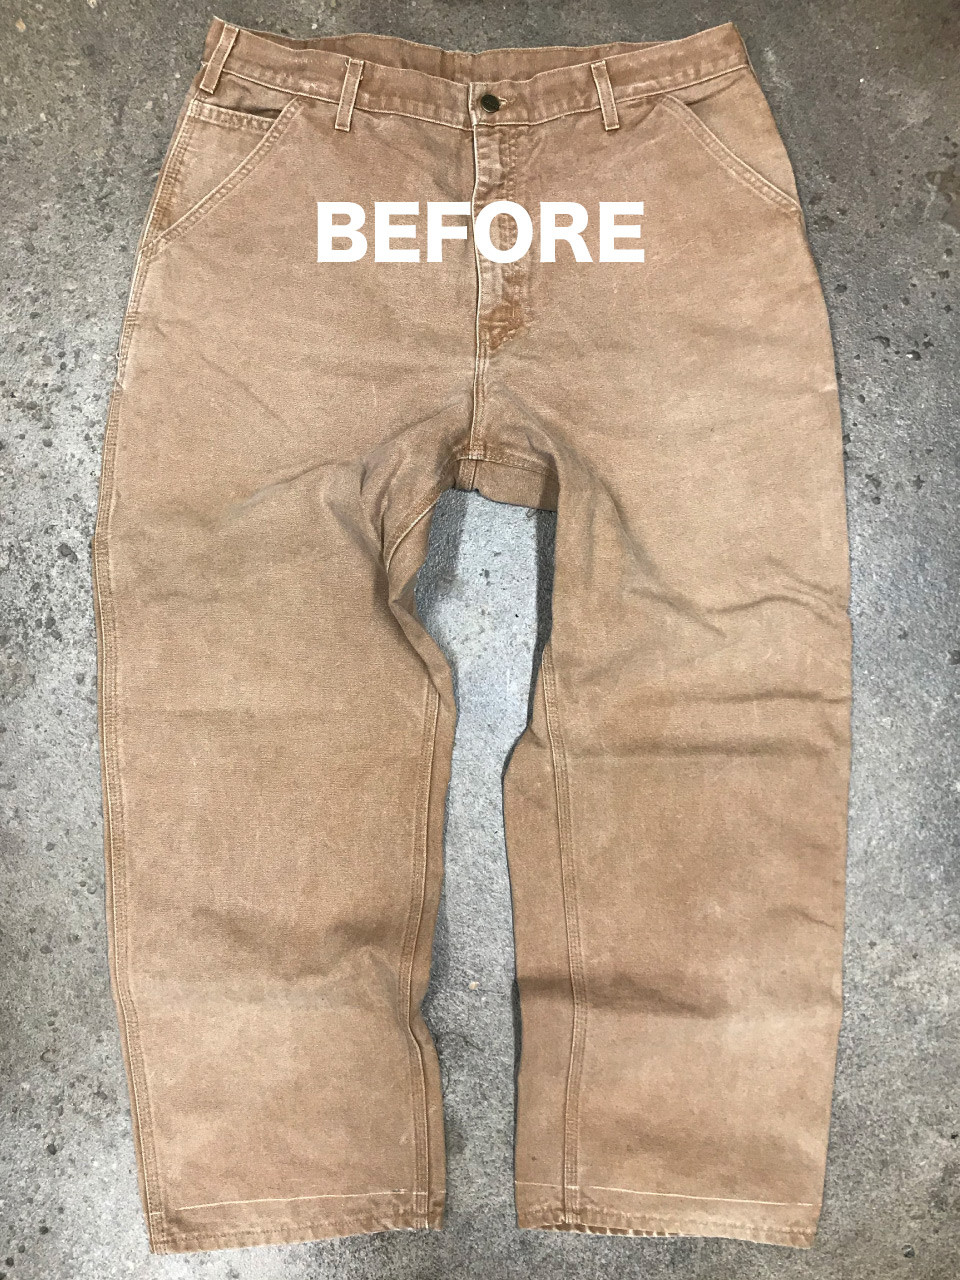 Tapering Service - 3-Stitch Work Pants